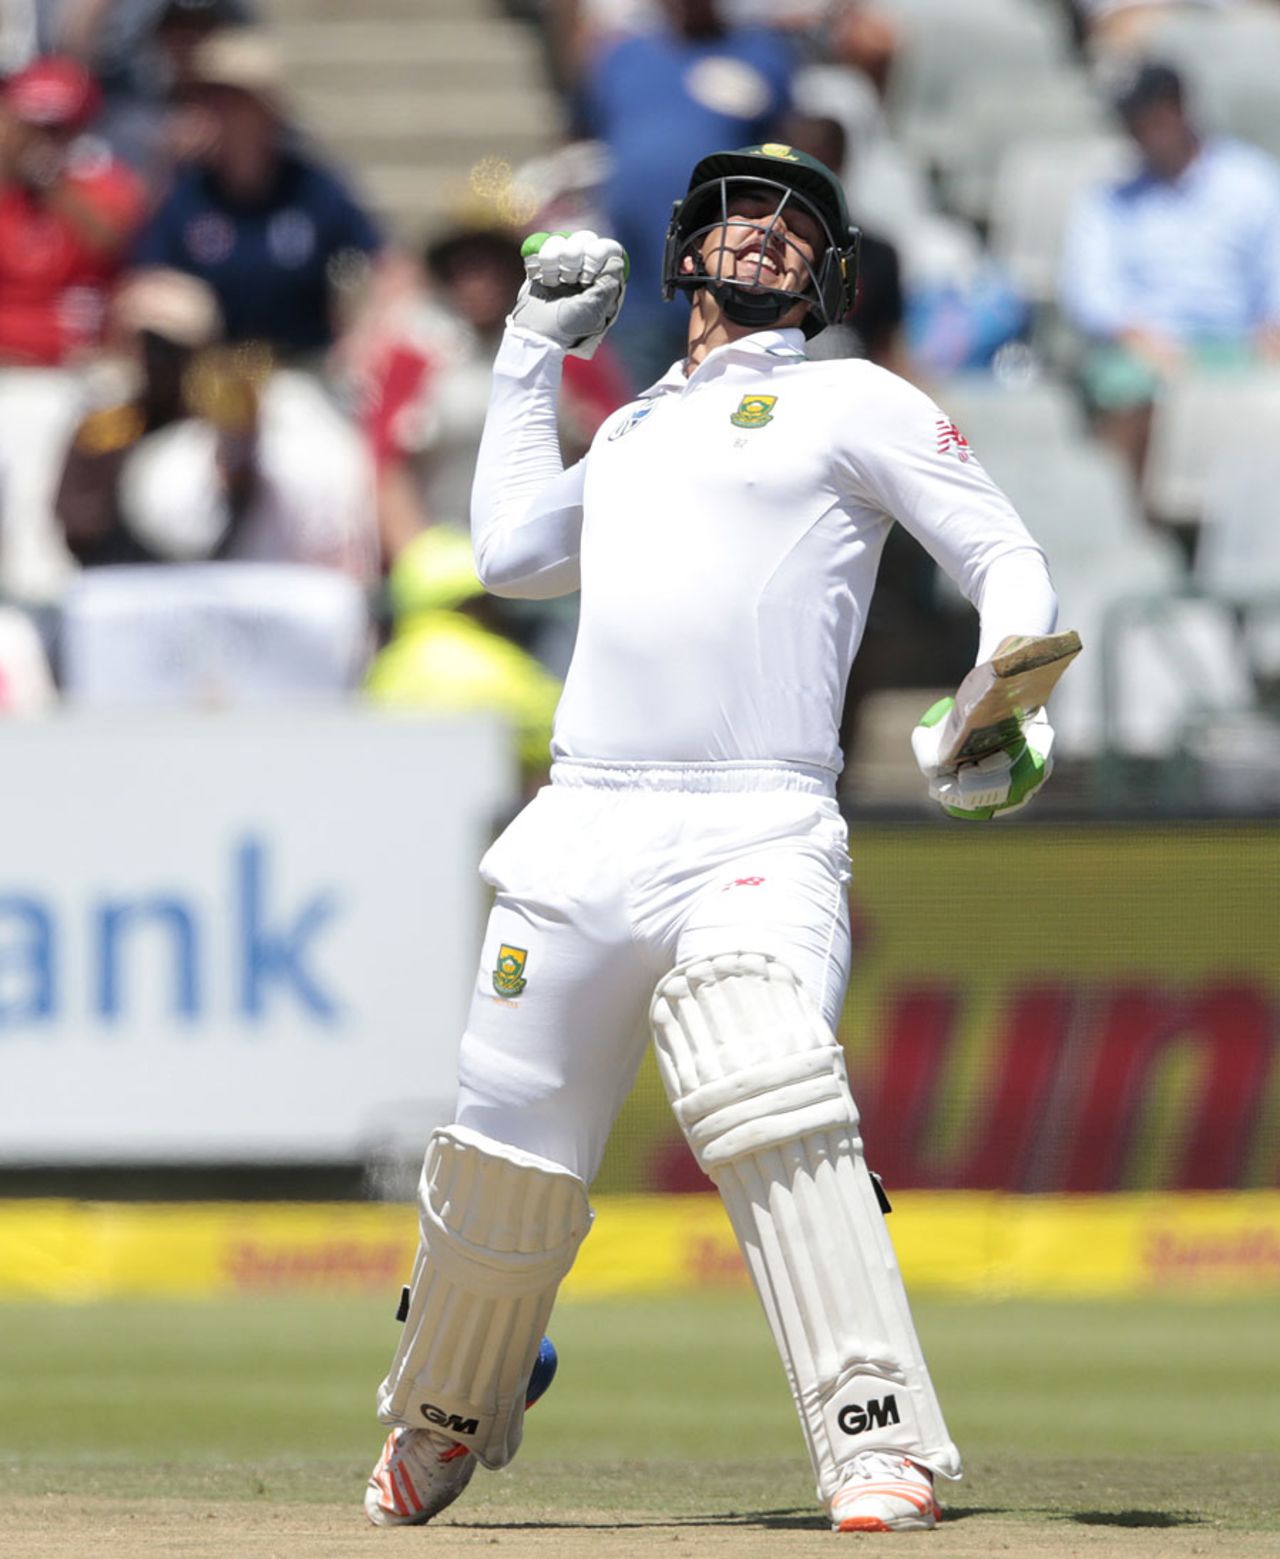 Quinton de Kock punches the air after reaching his hundred, South Africa v Sri Lanka, 2nd Test, Cape Town, 2nd day, January 3, 2017